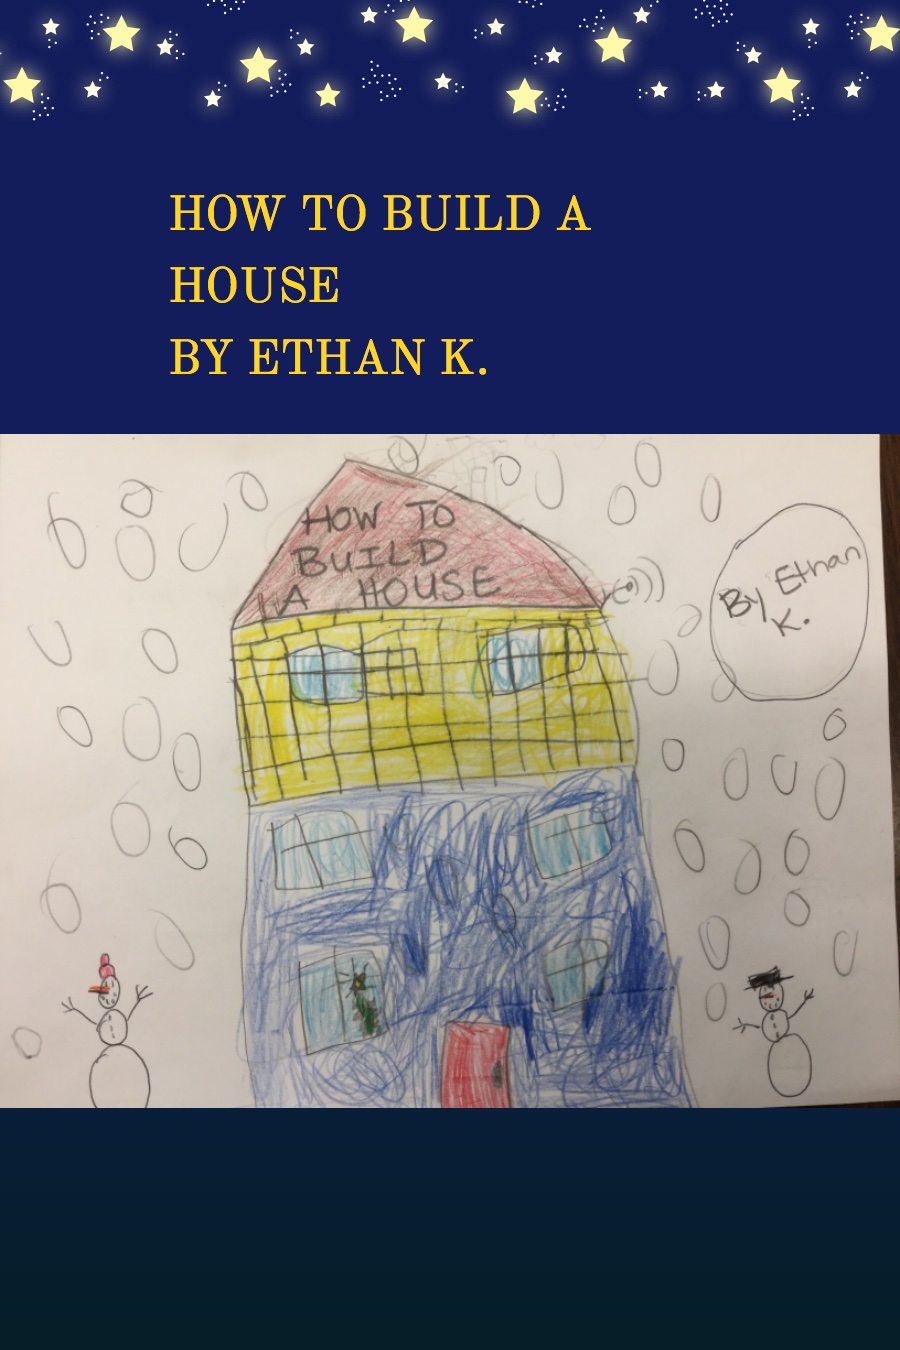 How to Build a House by Ethan K